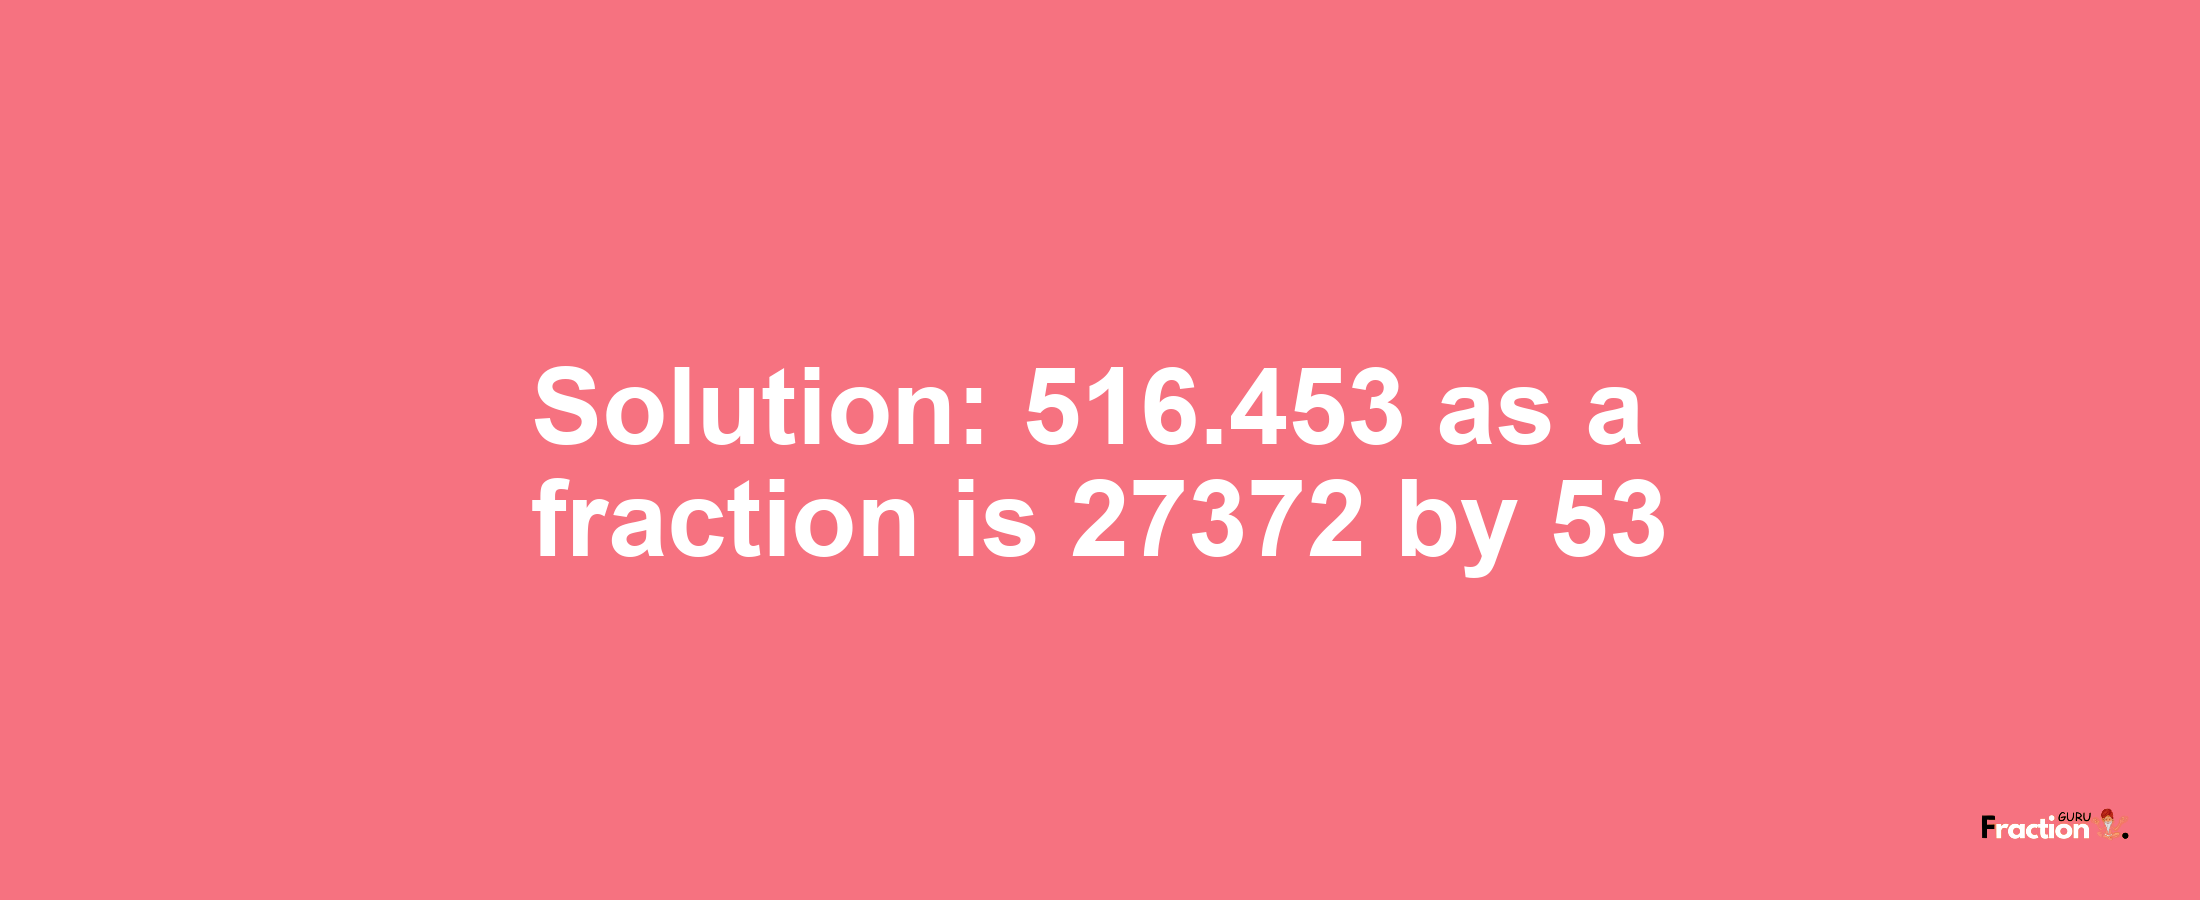 Solution:516.453 as a fraction is 27372/53